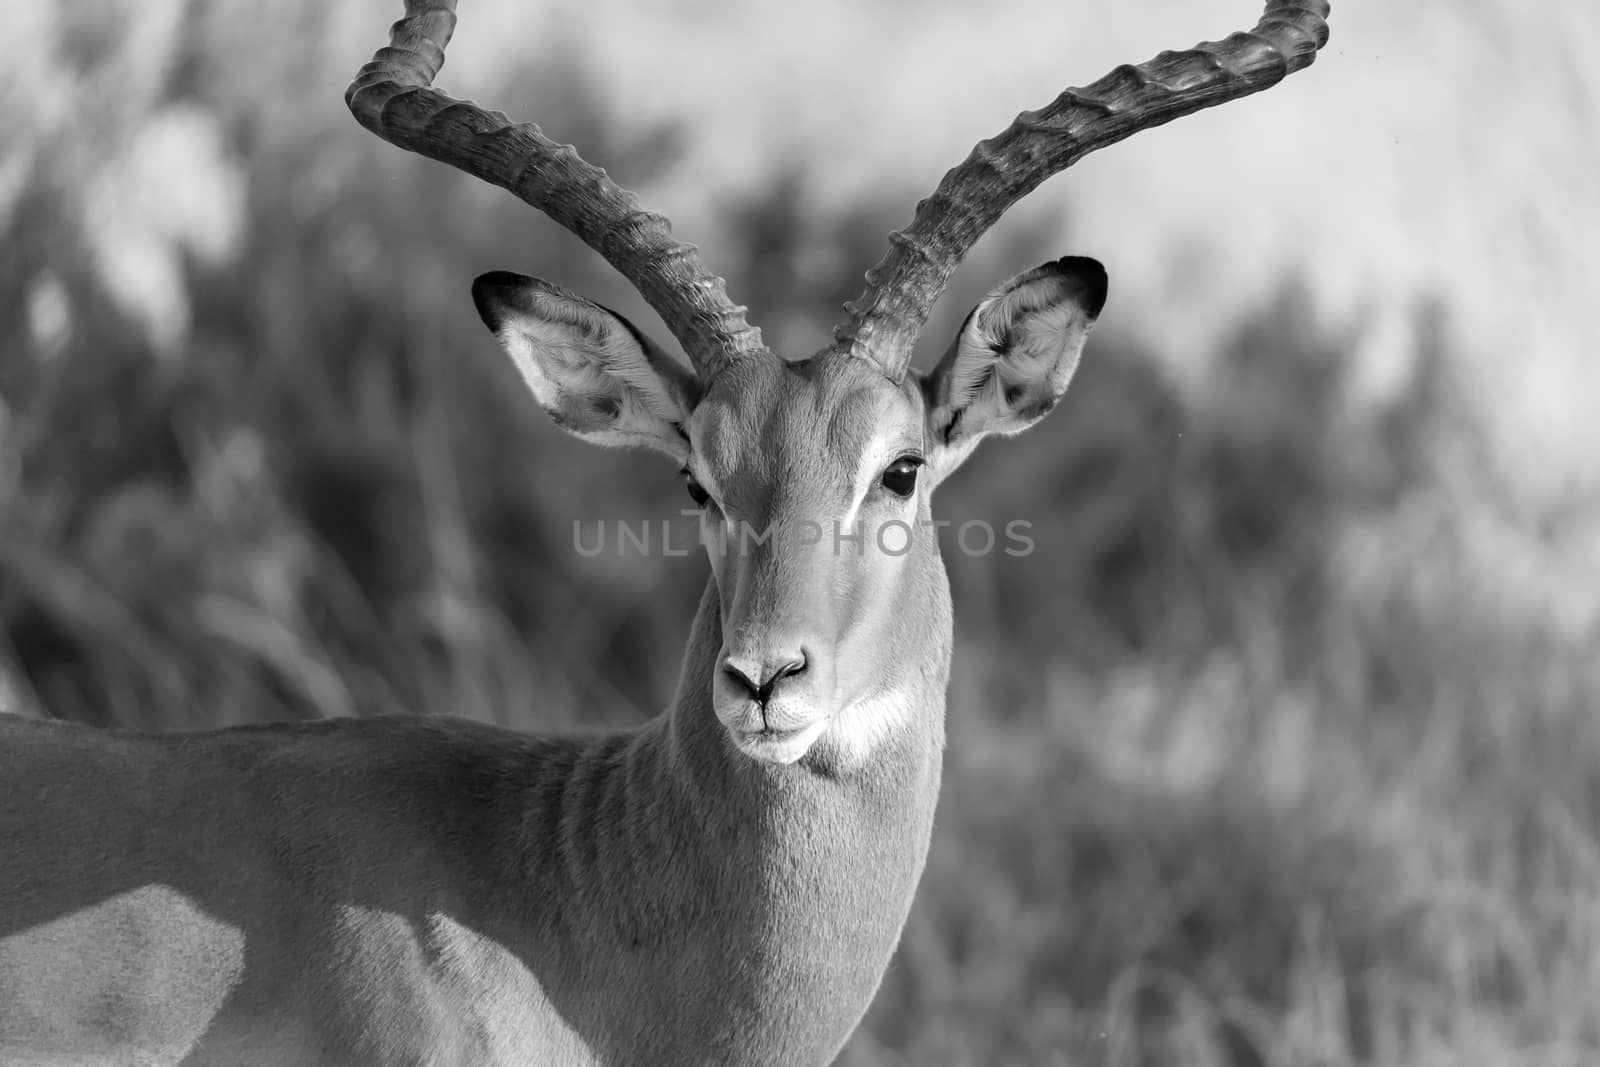 The portrait of an Impala antelope in the savannah of Kenya